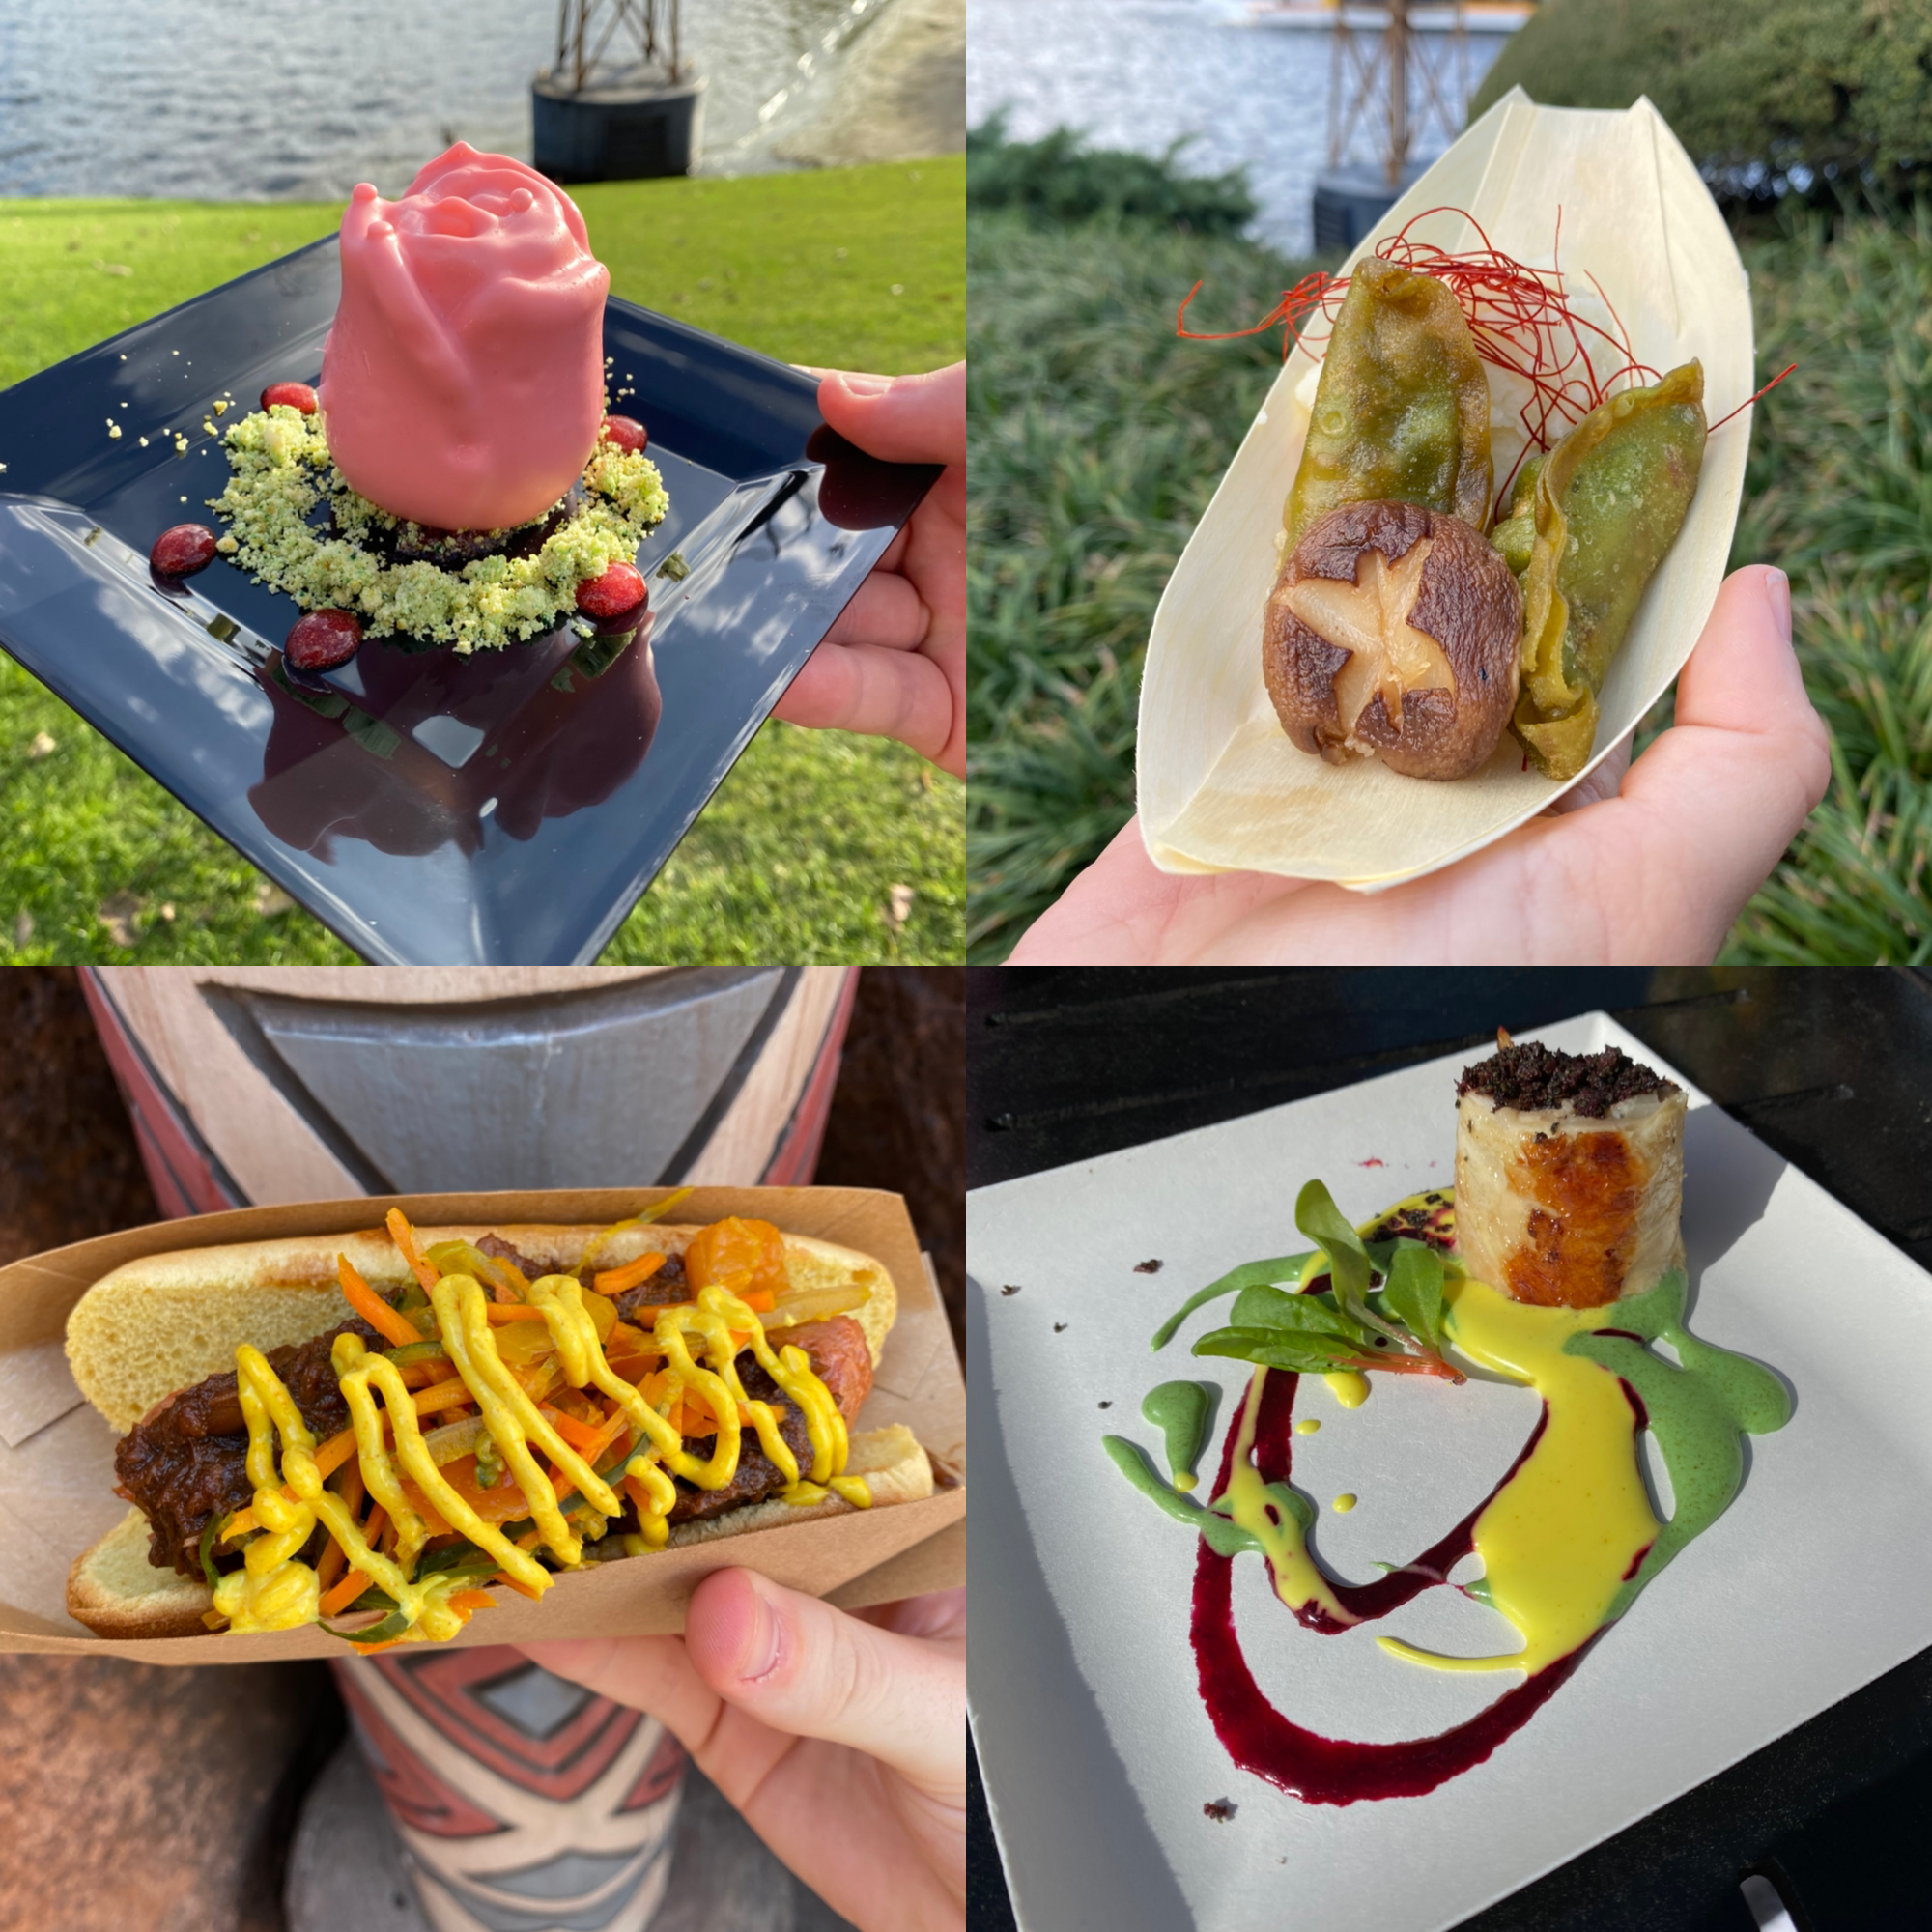 Our Top 5 Favorite New Menu Items From Epcot's Festival of the Arts 2020!